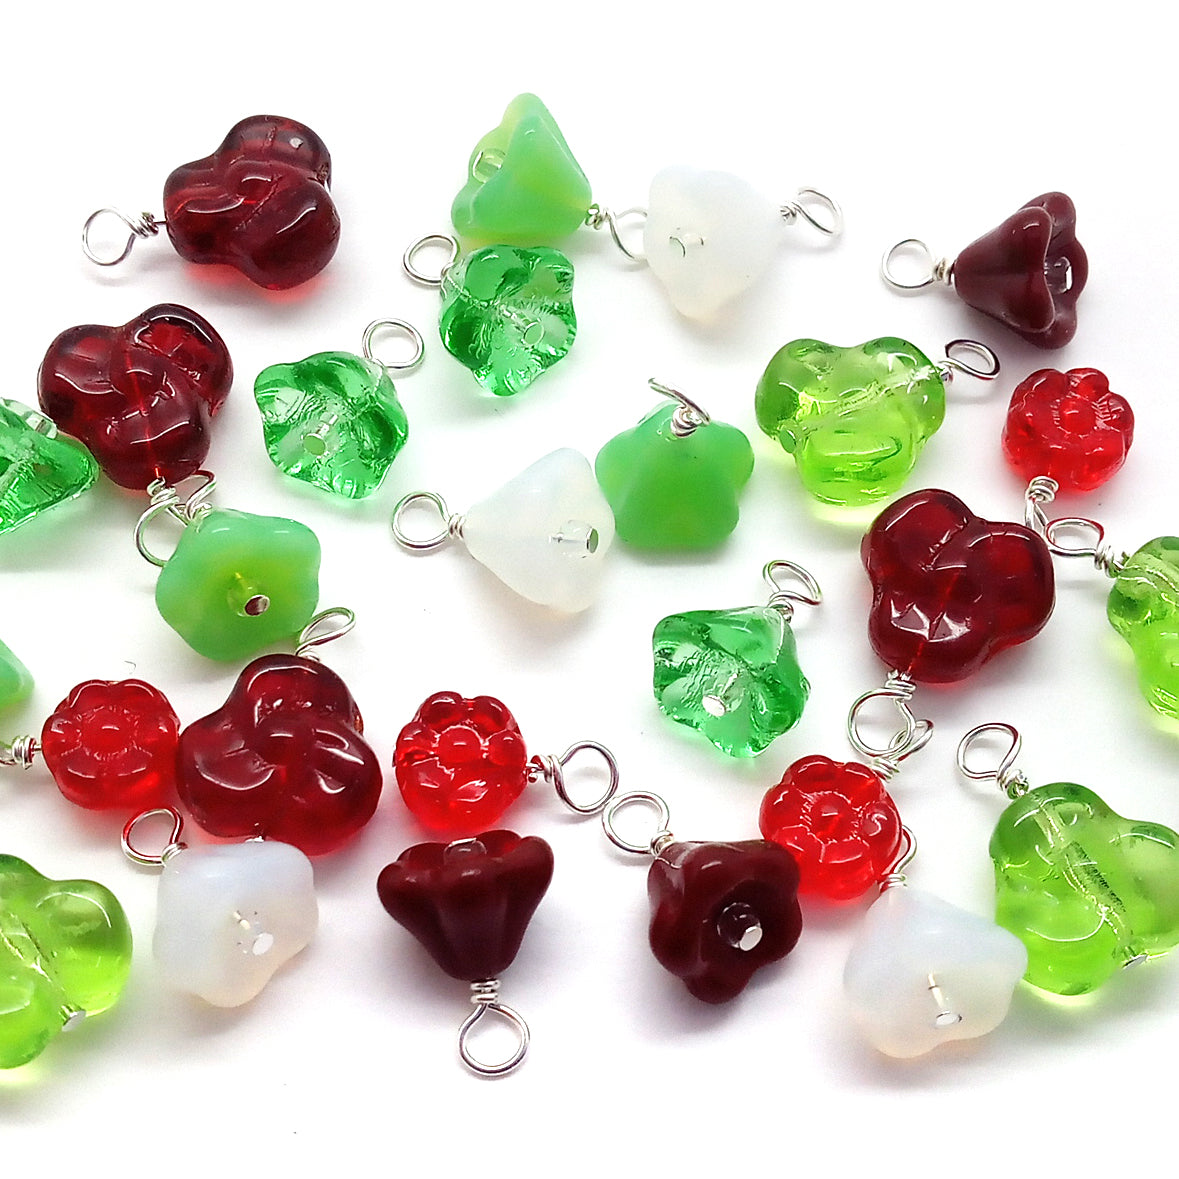 Floral bead dangles in Christmas colors, red and green glass bead flower charms.